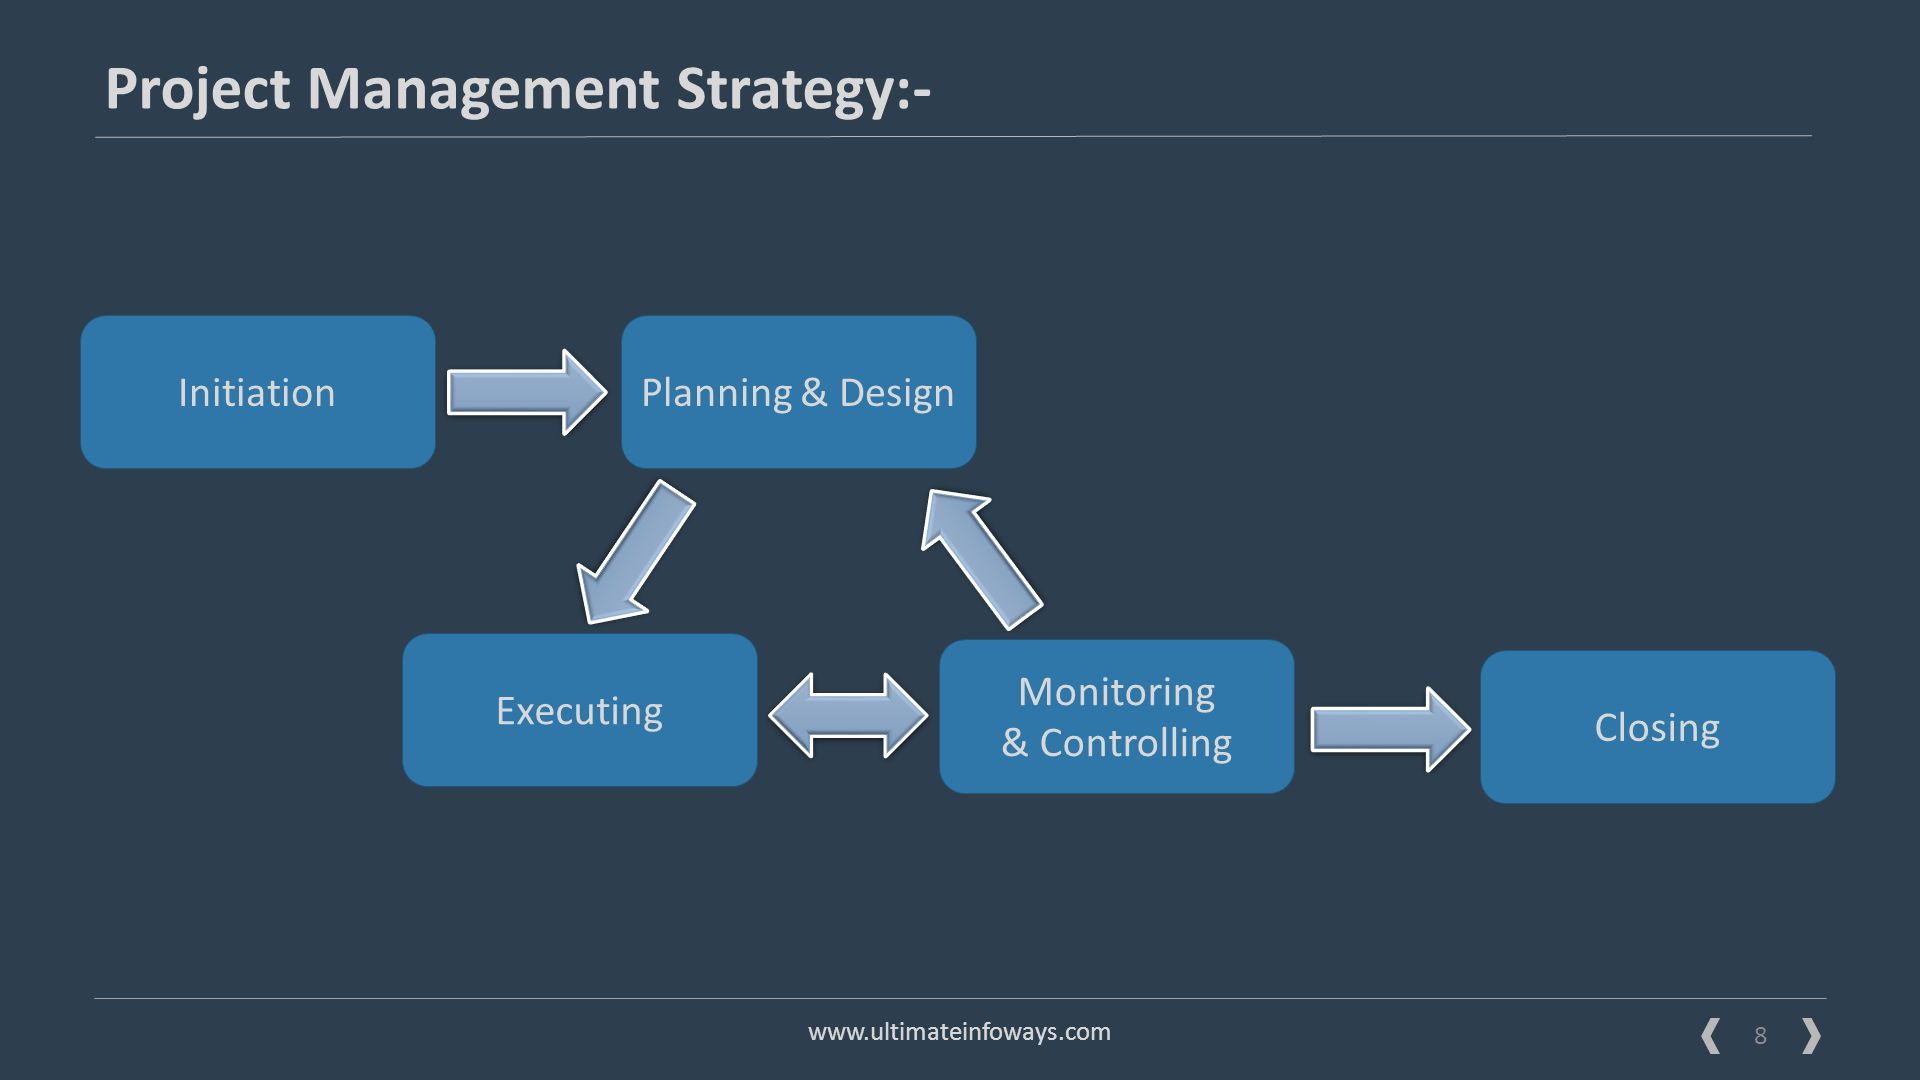 8 Solutions   Project Management Strategy:-   InitiationPlanning & Design Executing Monitoring & Controlling Closing